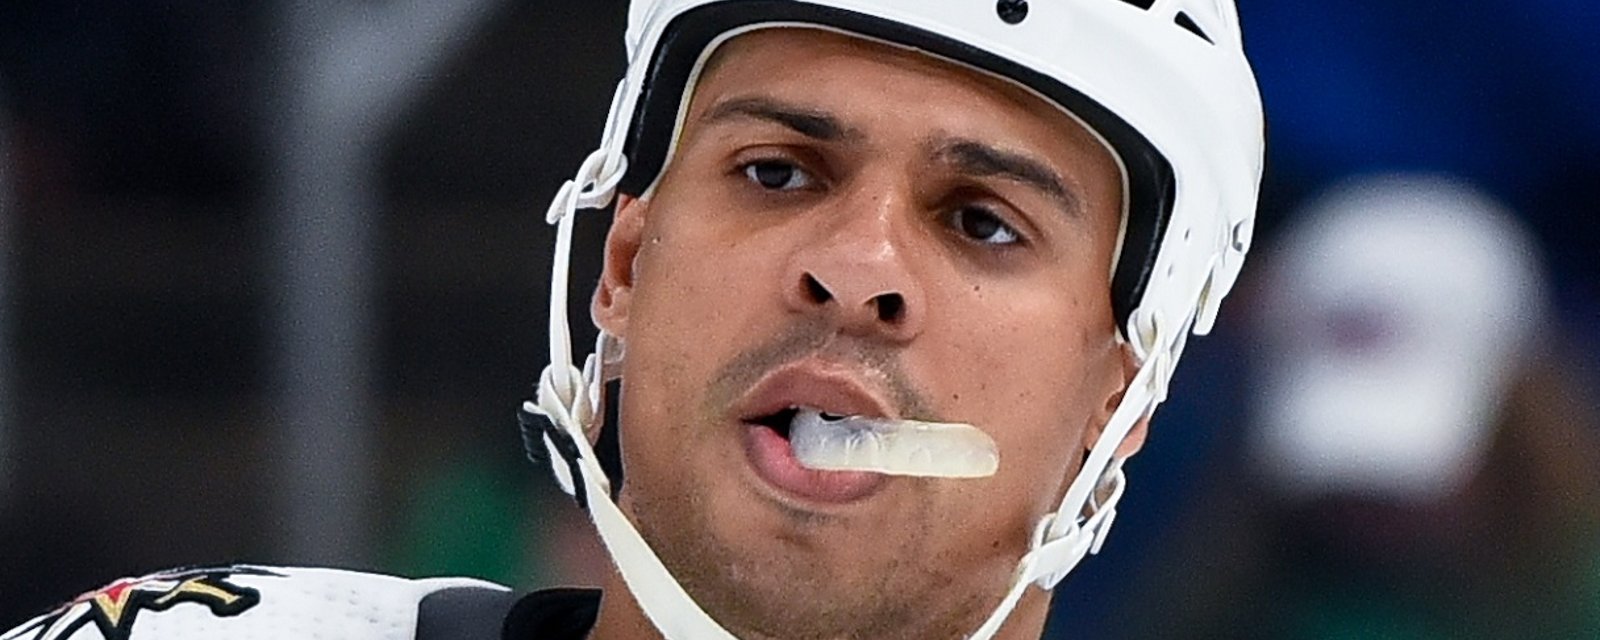 Ryan Reaves explains why he doesn't kneel for the anthem.